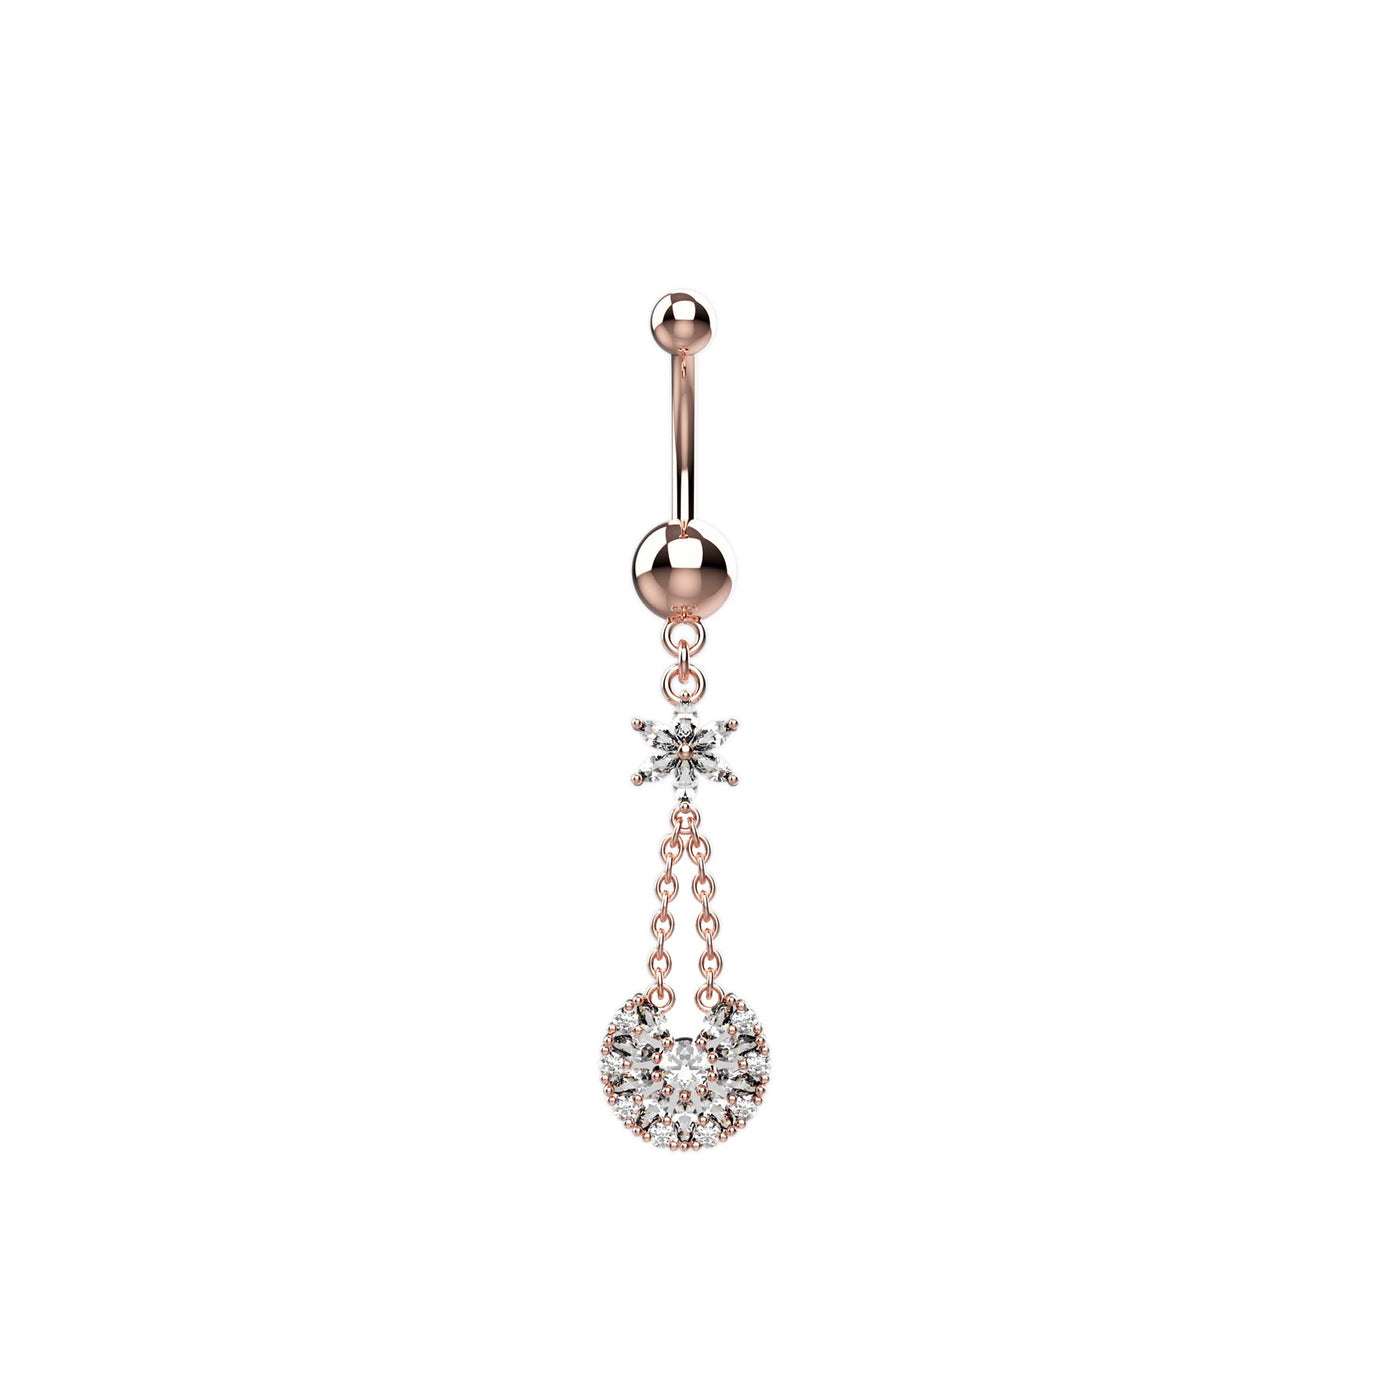 14G Champagne Gems Dangle Belly Button Ring